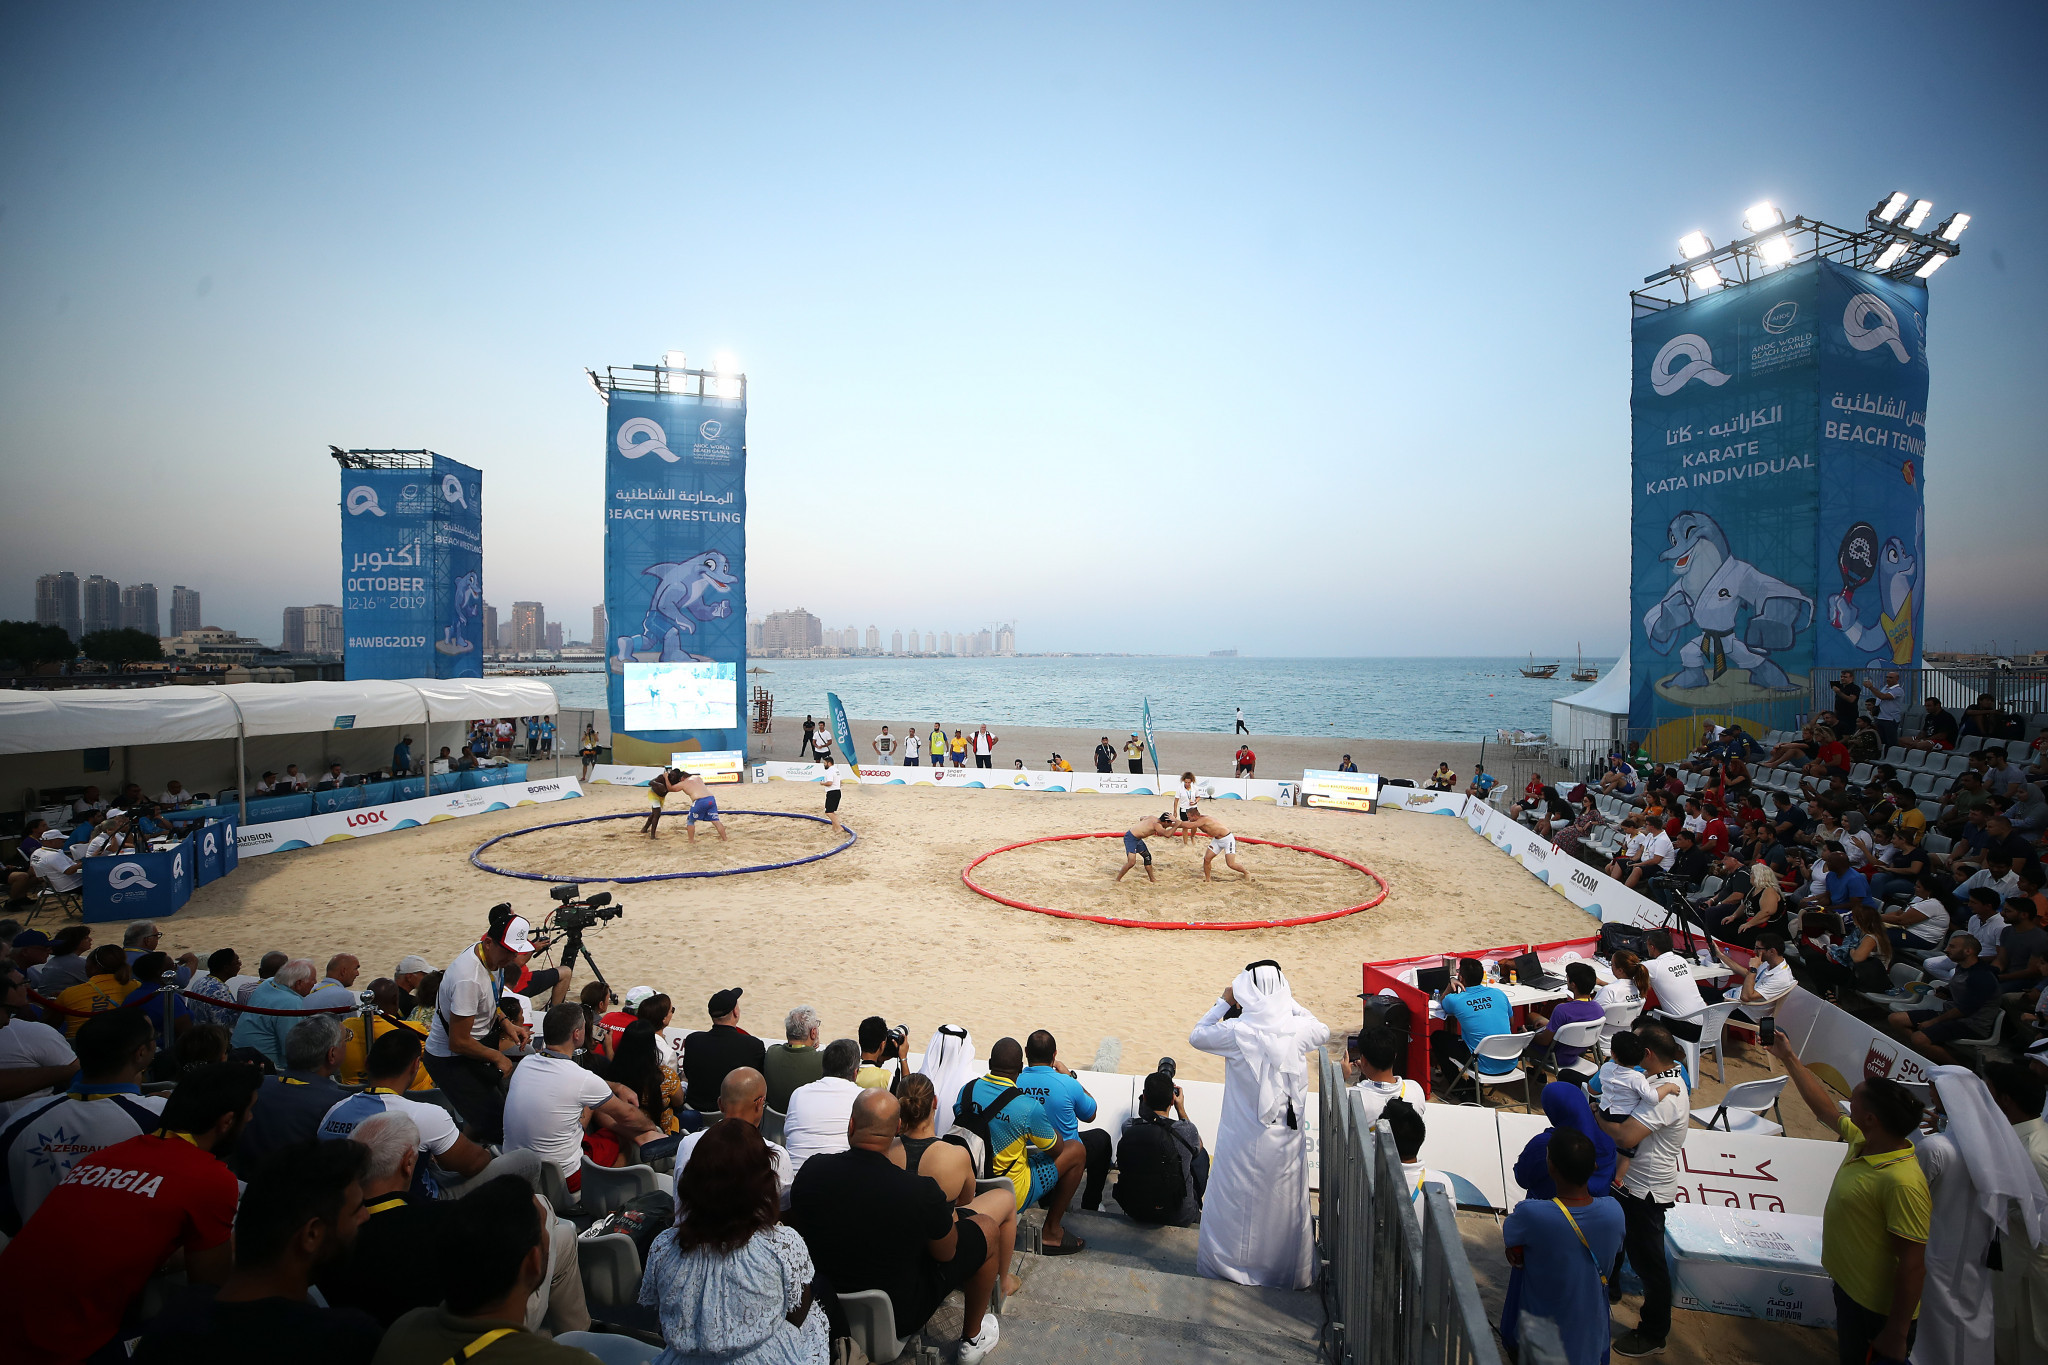 Following its removal from WADA's non-compliance list, Indonesia will be eligible to host events such as the ANOC World Beach Games, for which it is the sole candidate to do so, in 2023 ©Getty Images